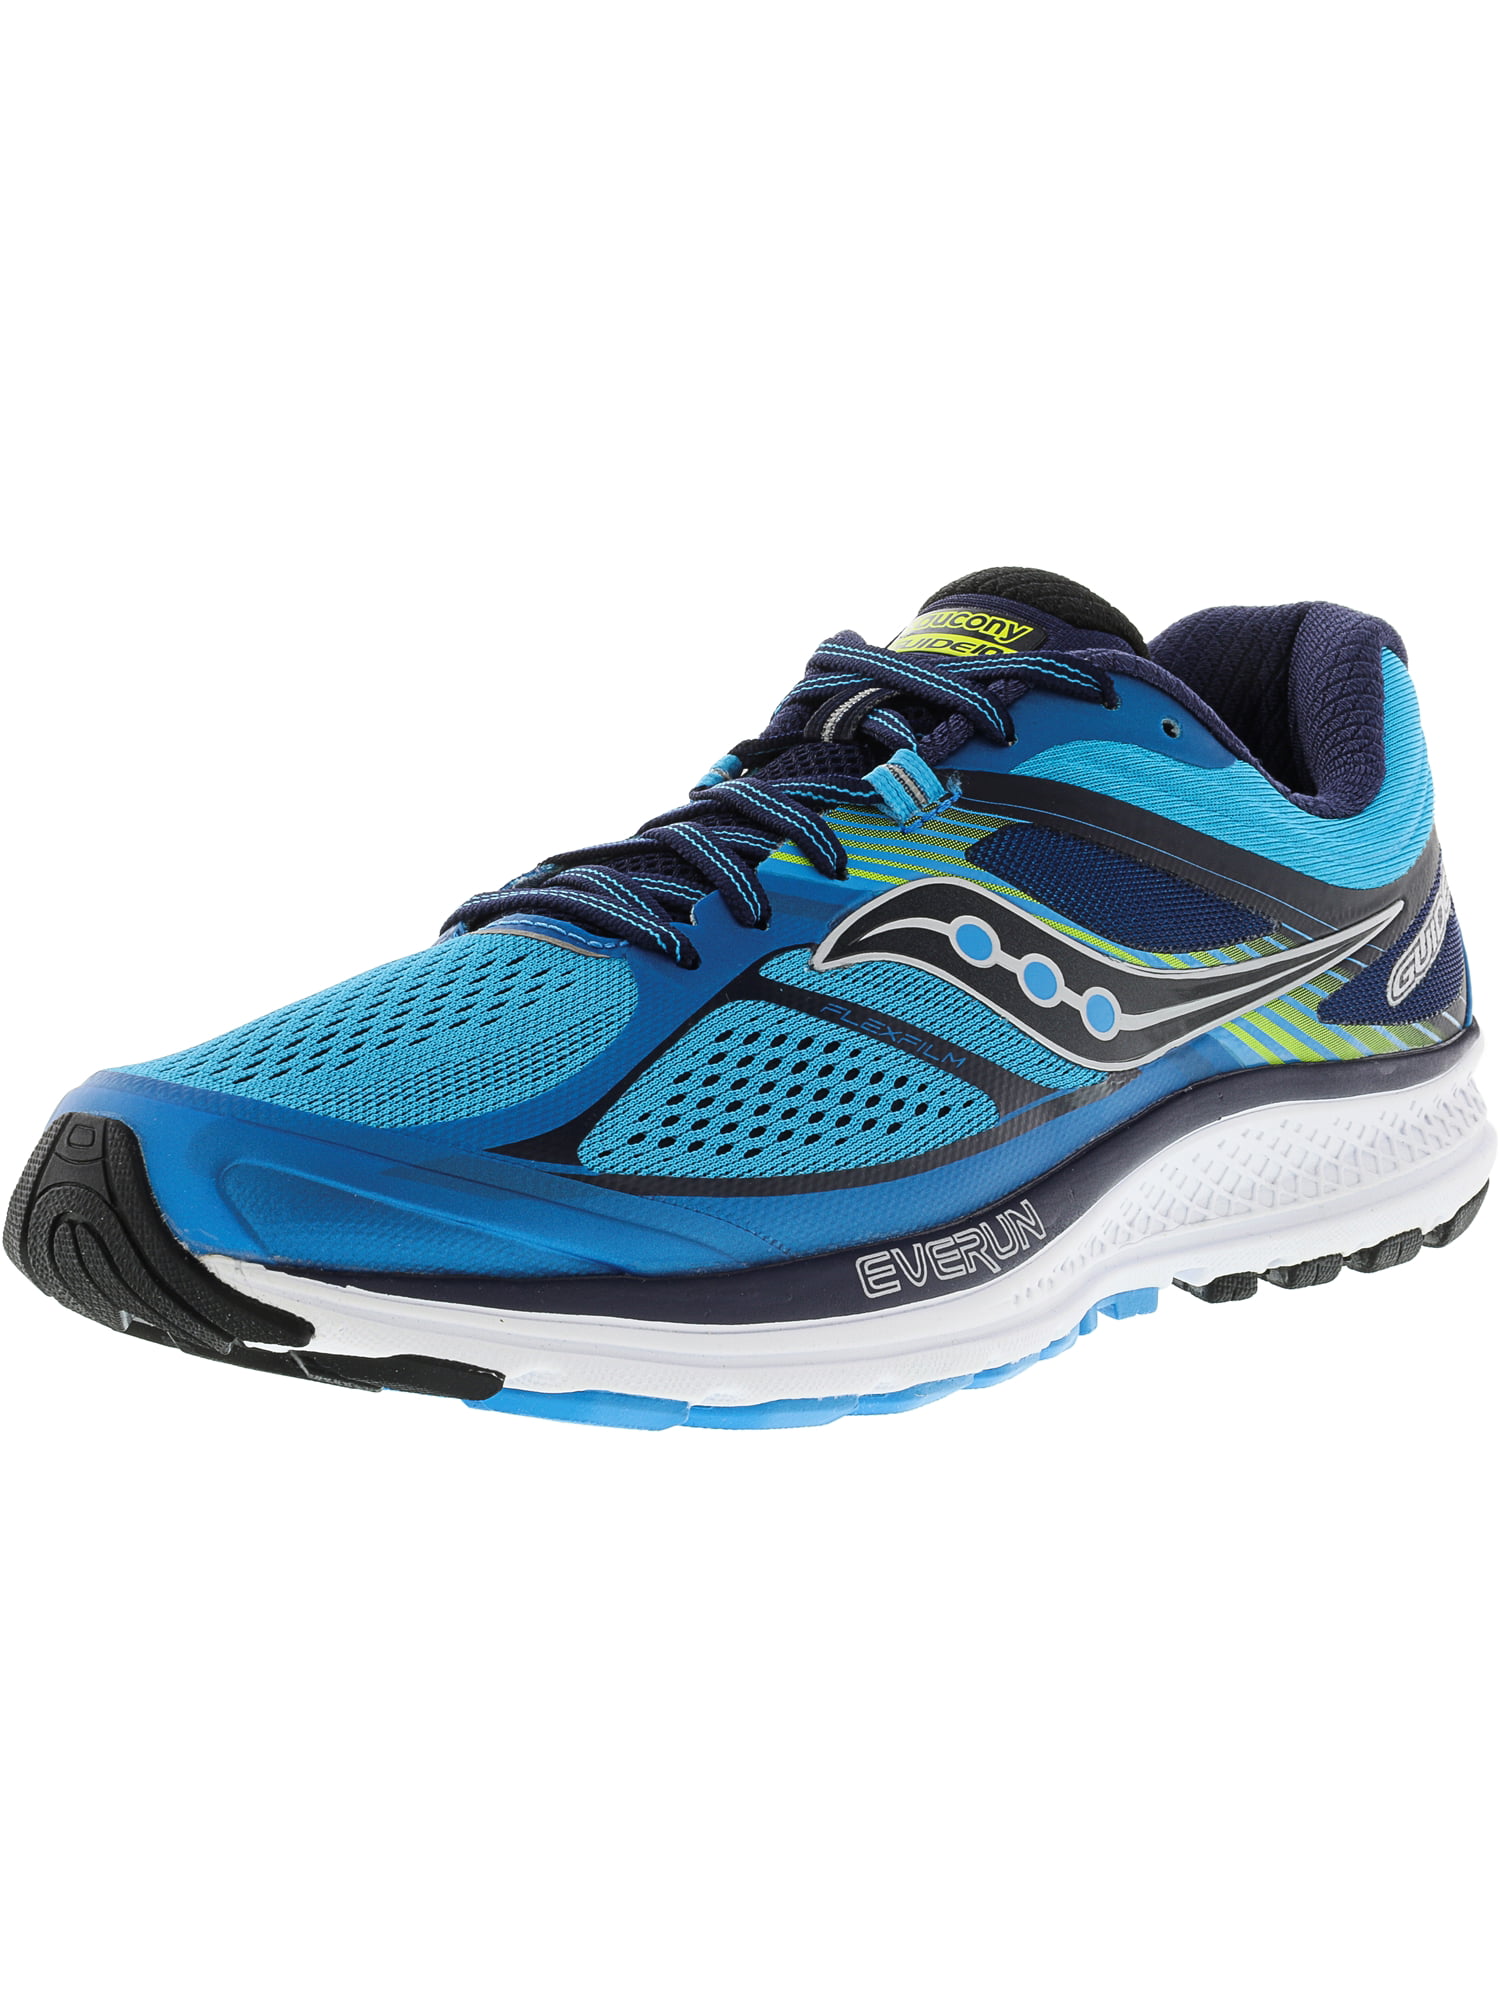 Saucony Guide 10 Wide Mens Running Shoe US Size  Wide S20351-1 Brand New 